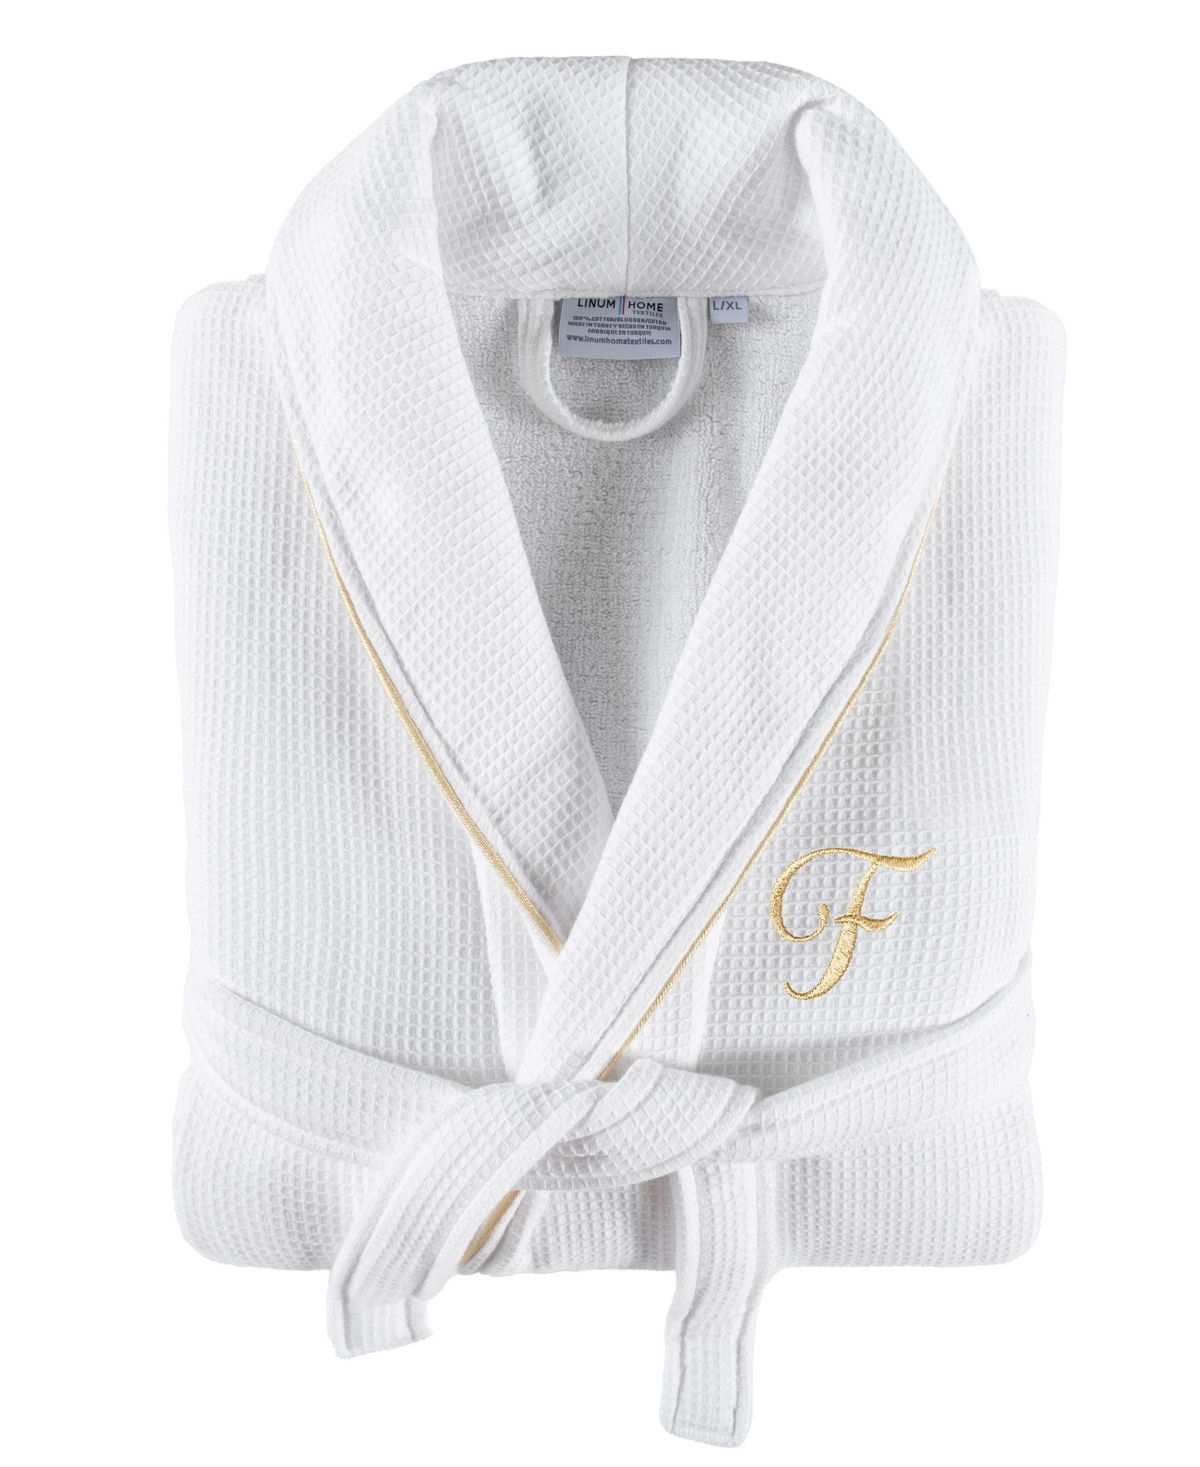 Linum Home Textiles 100% Turkish Cotton Unisex Personalized Waffle Weave Terry Bathrobe With Satin Piped Trim In White F